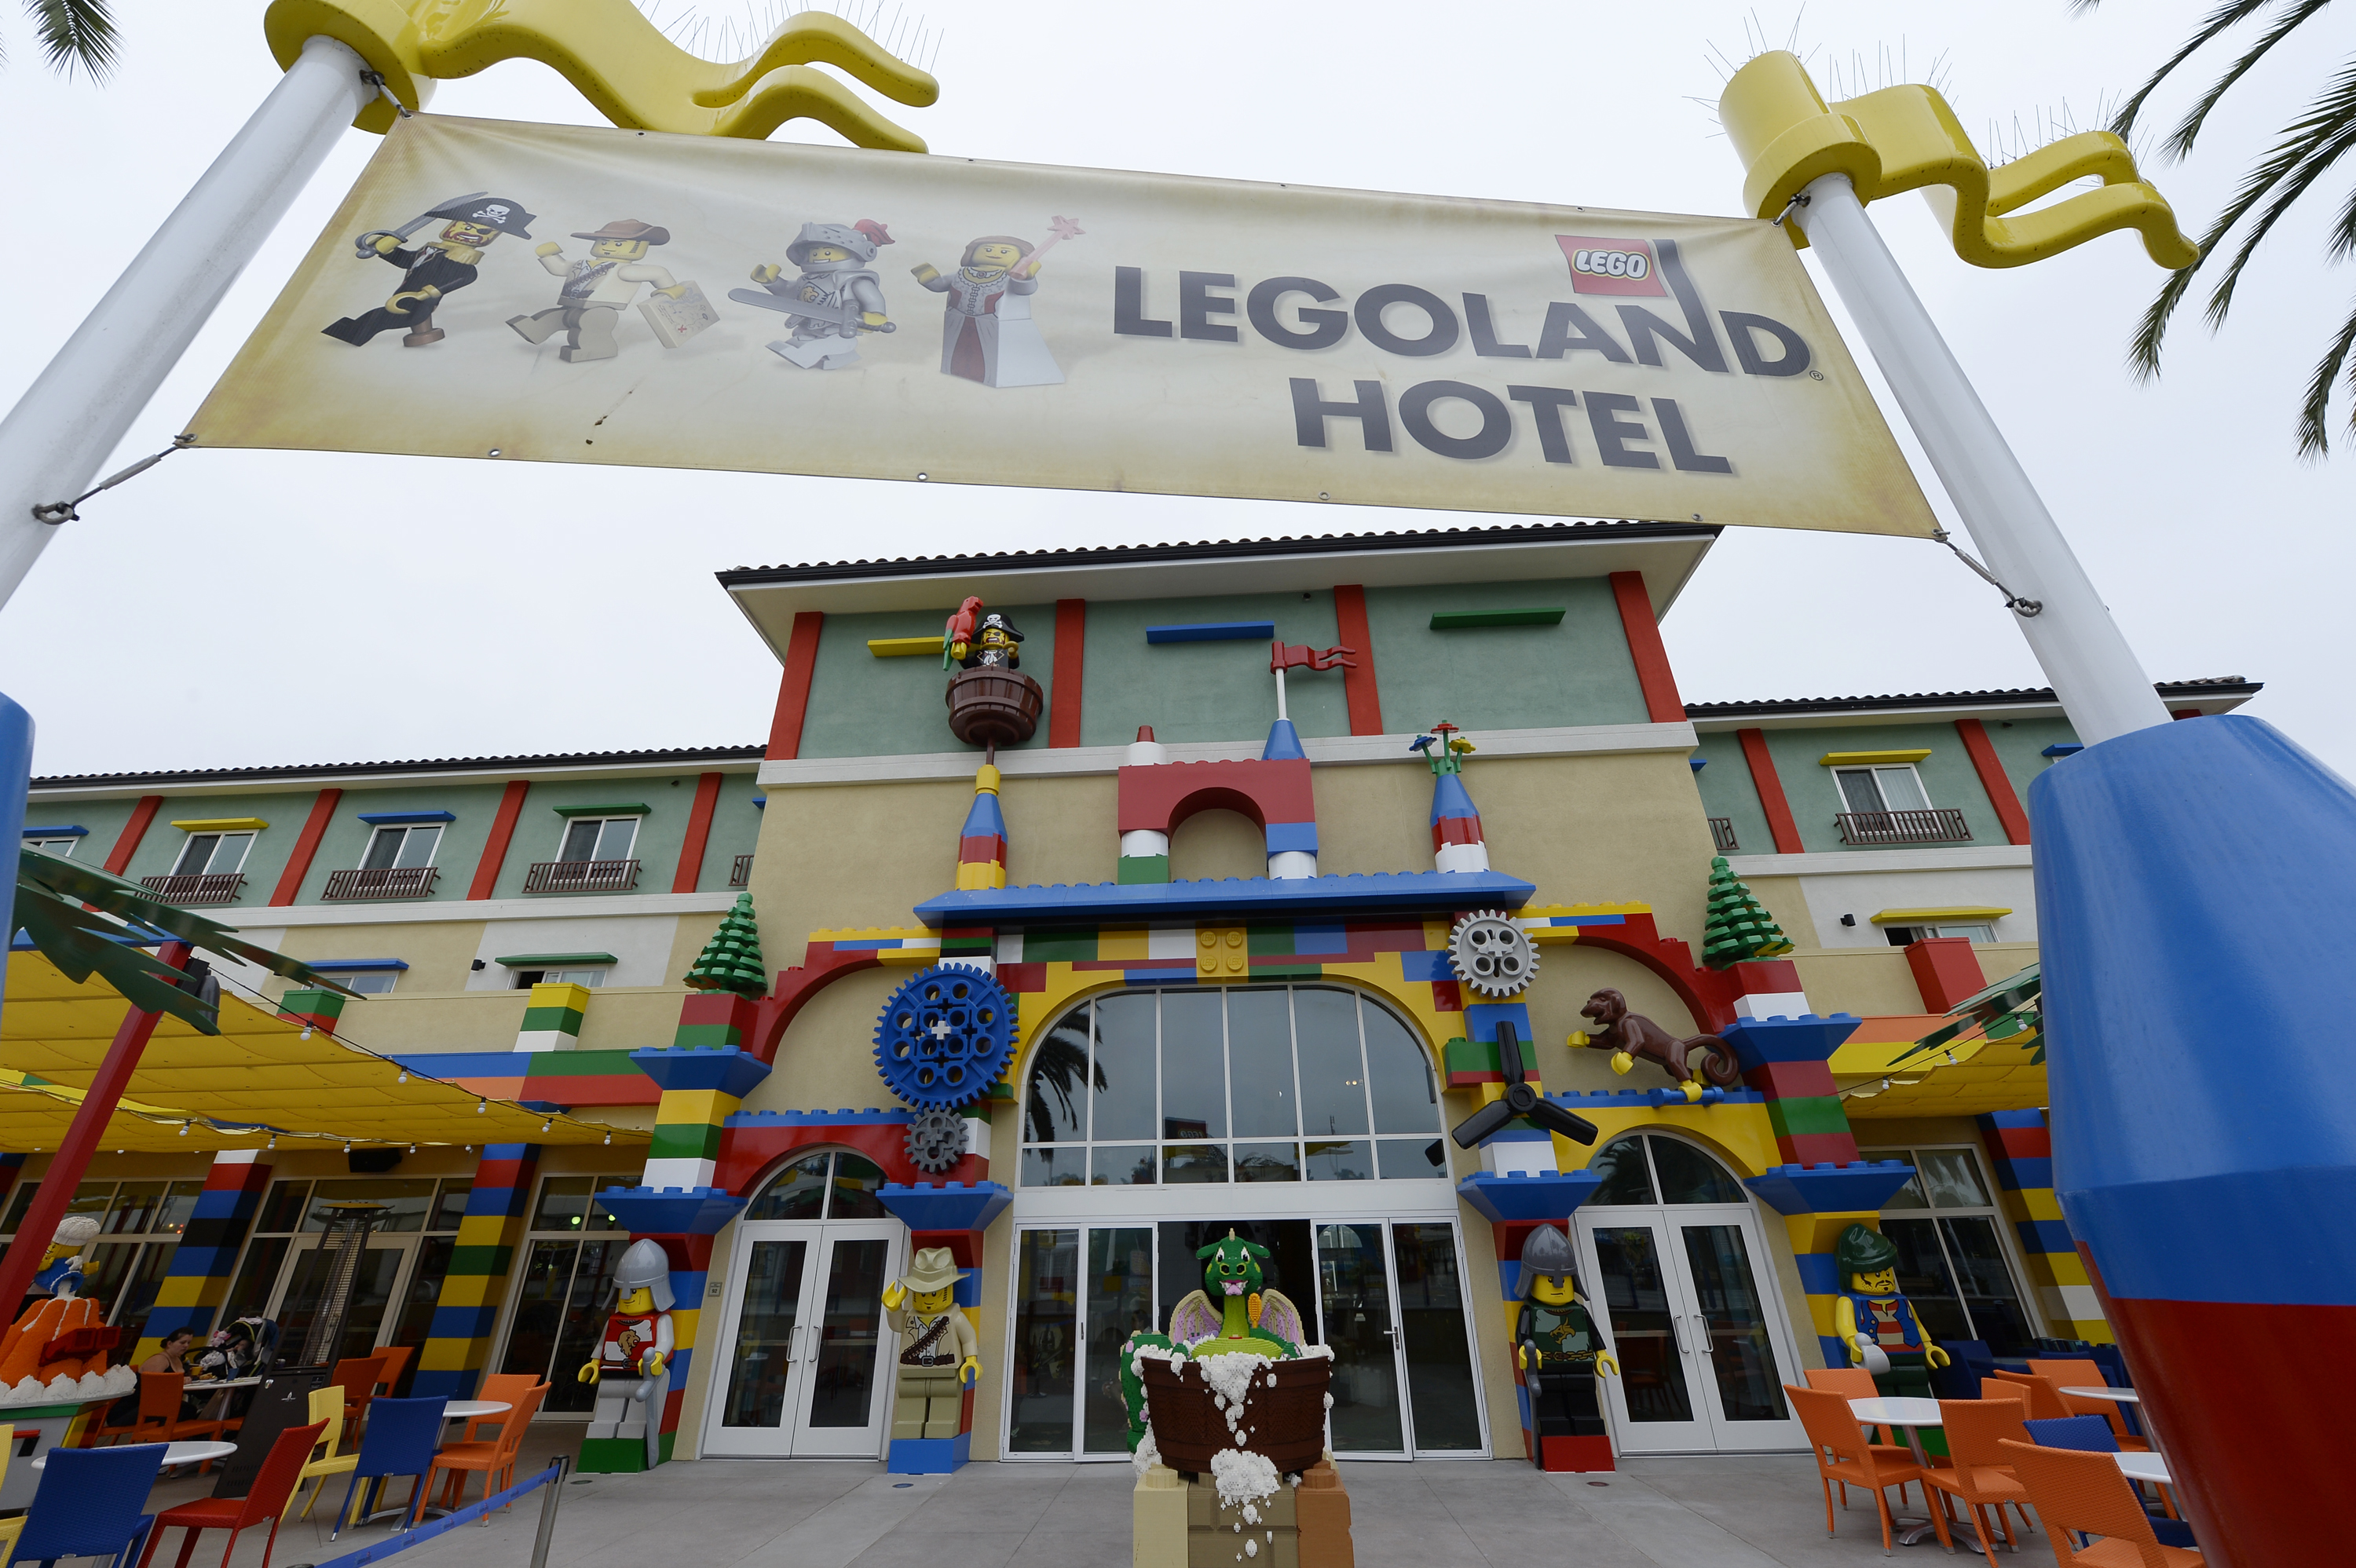 Legoland is forced to close after far-right extremists threaten violence over a Muslim family weekend